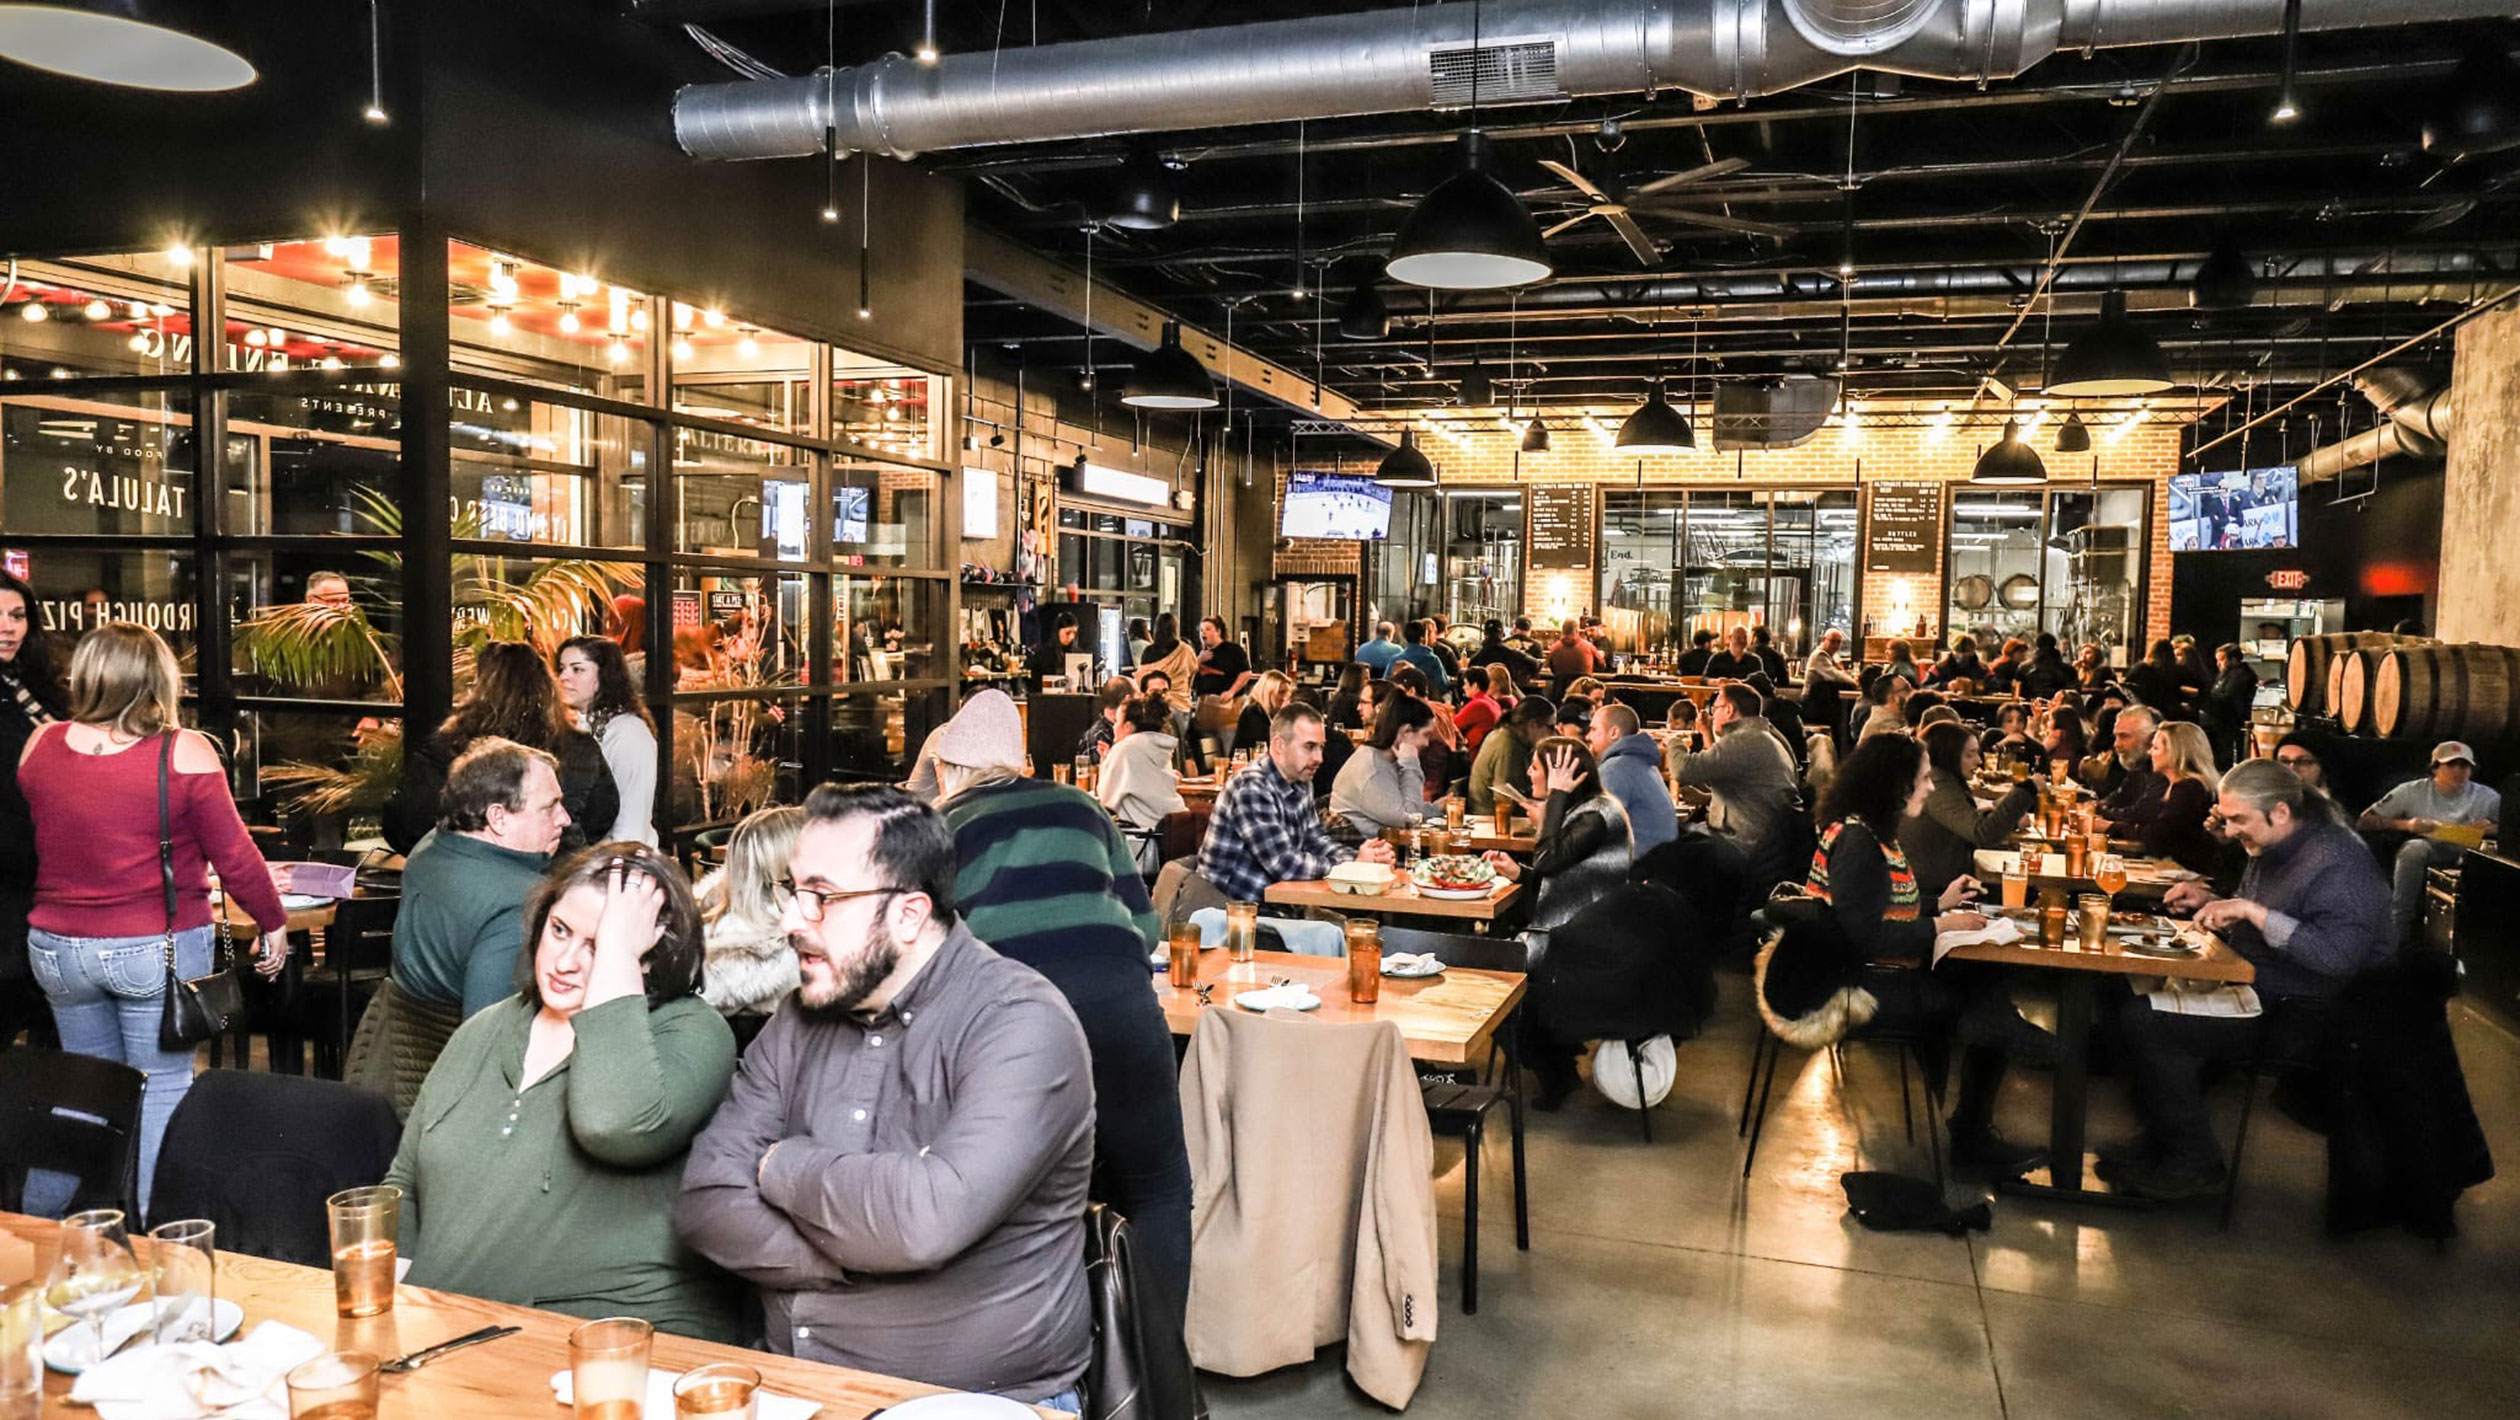 Photograph of the inside of a taproom full of tables seated with customers.